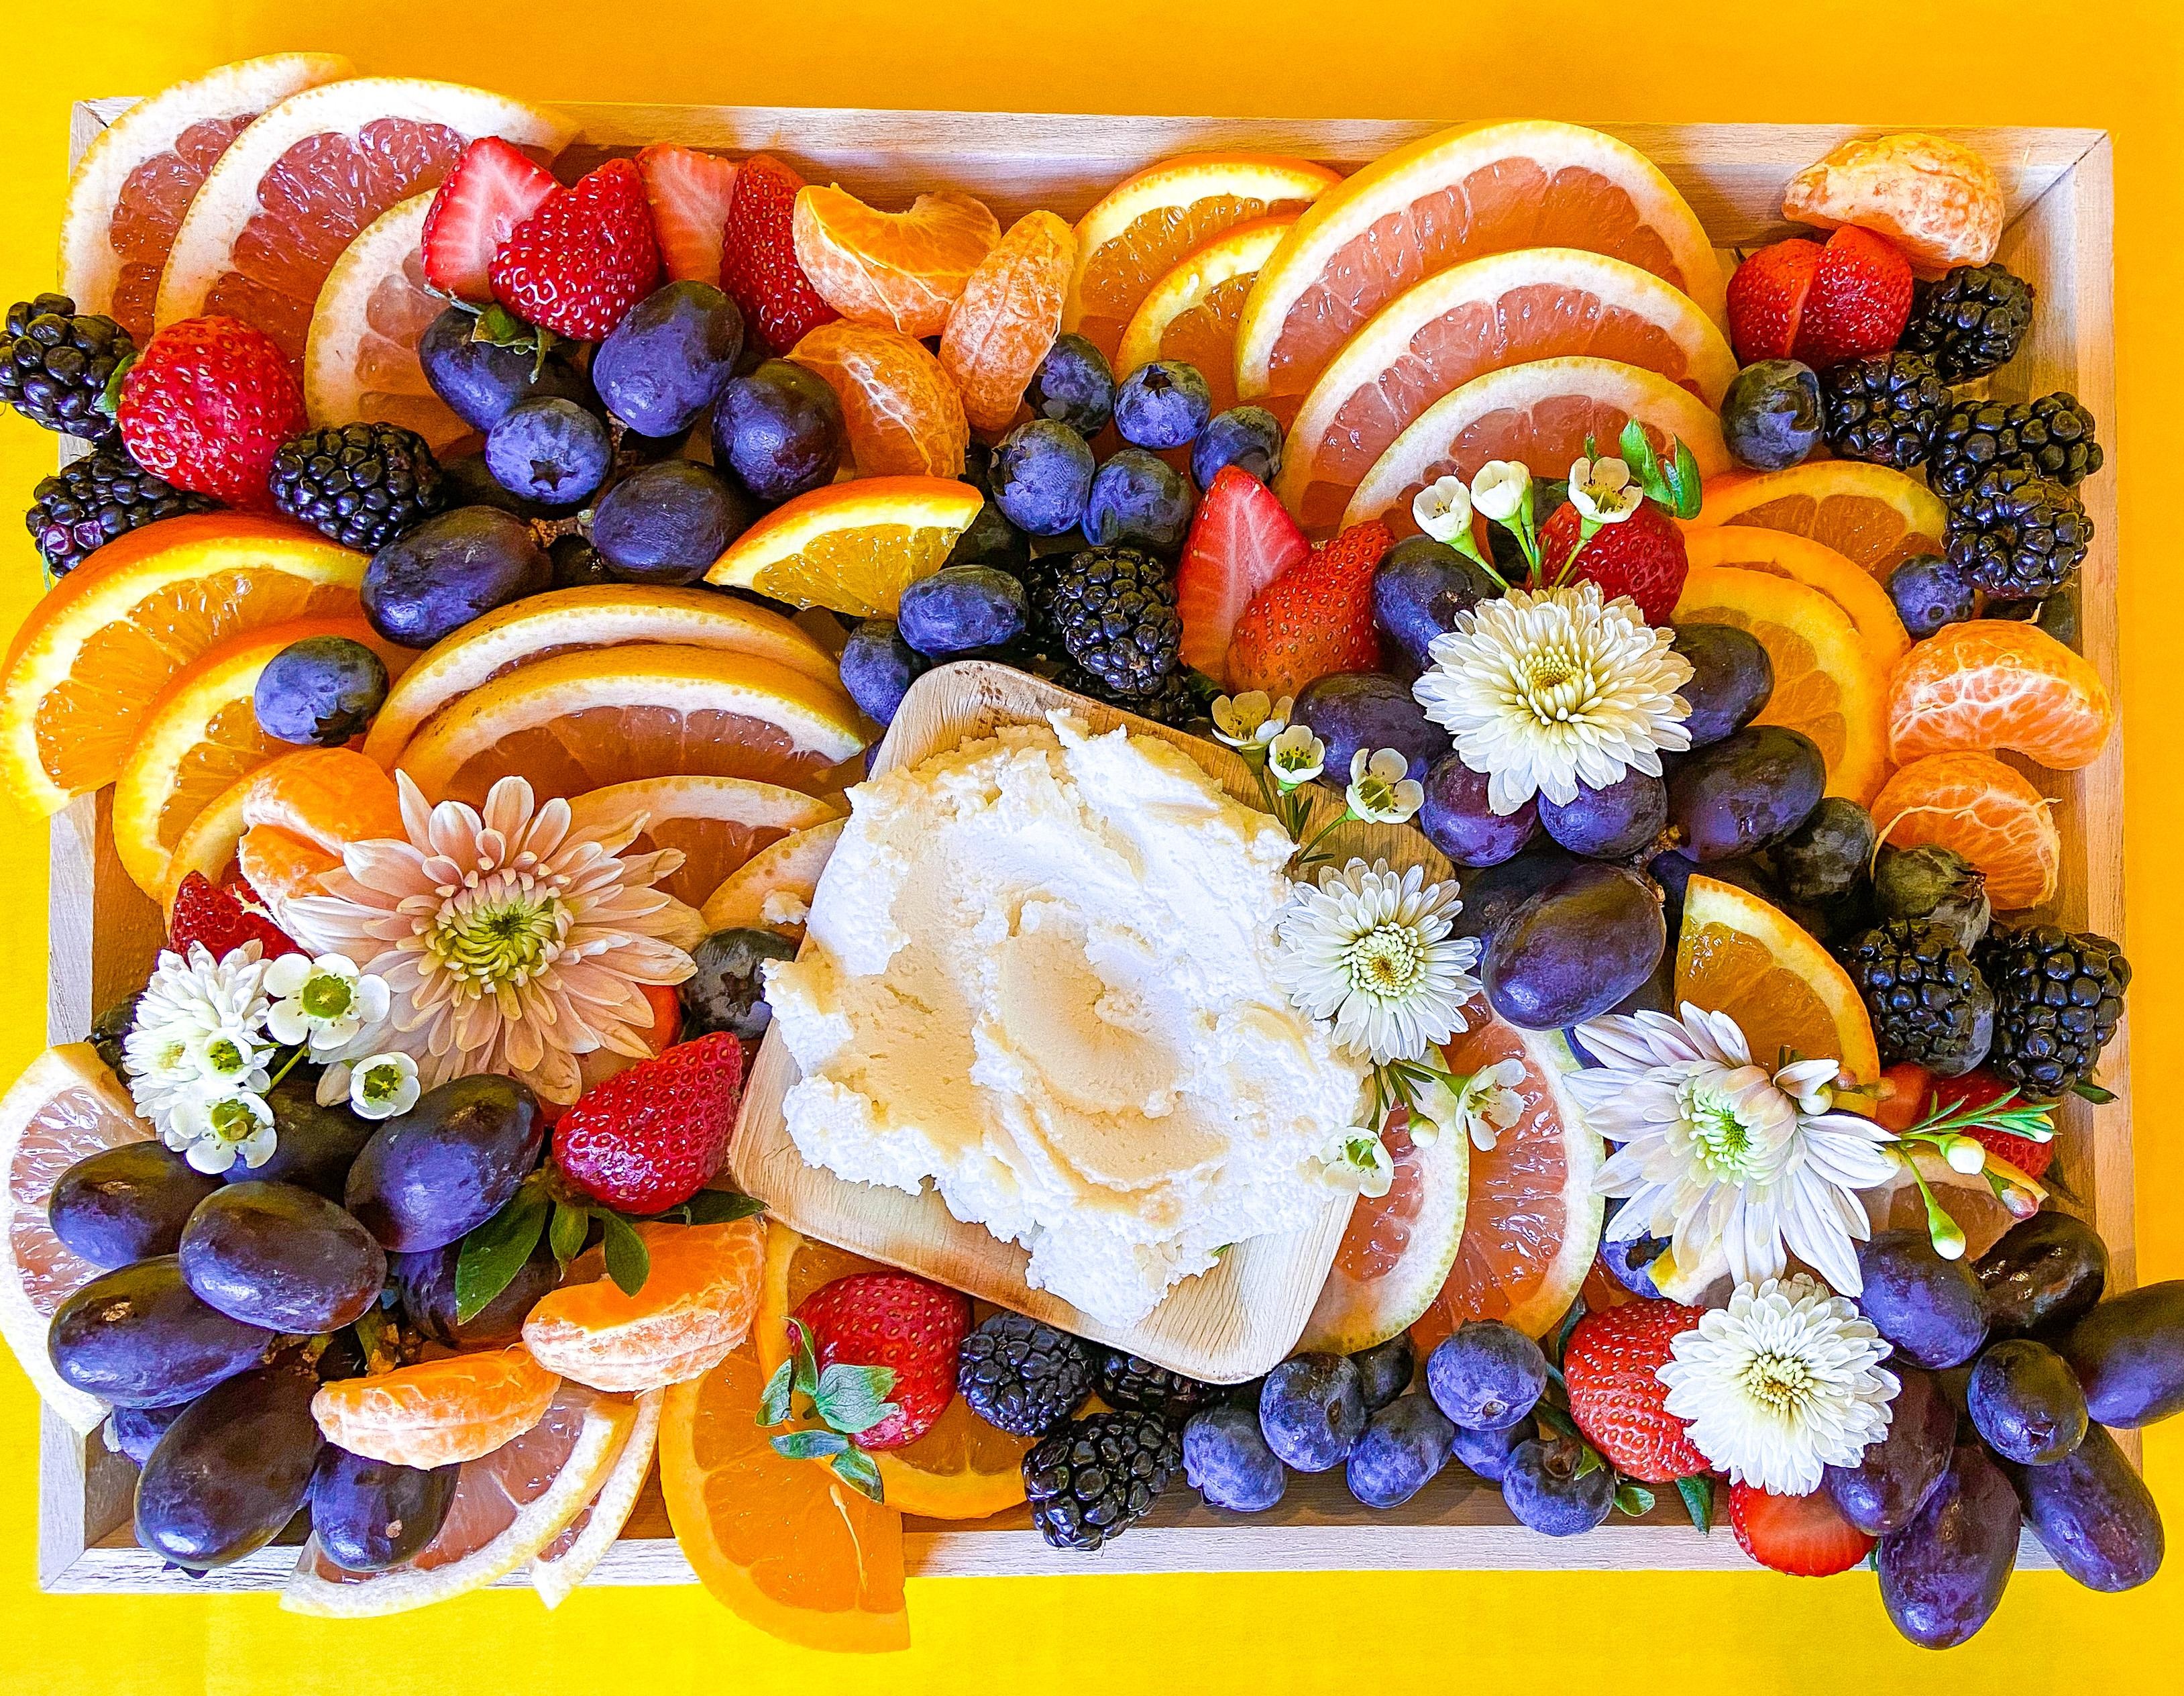 CATERED FRUIT BOARD